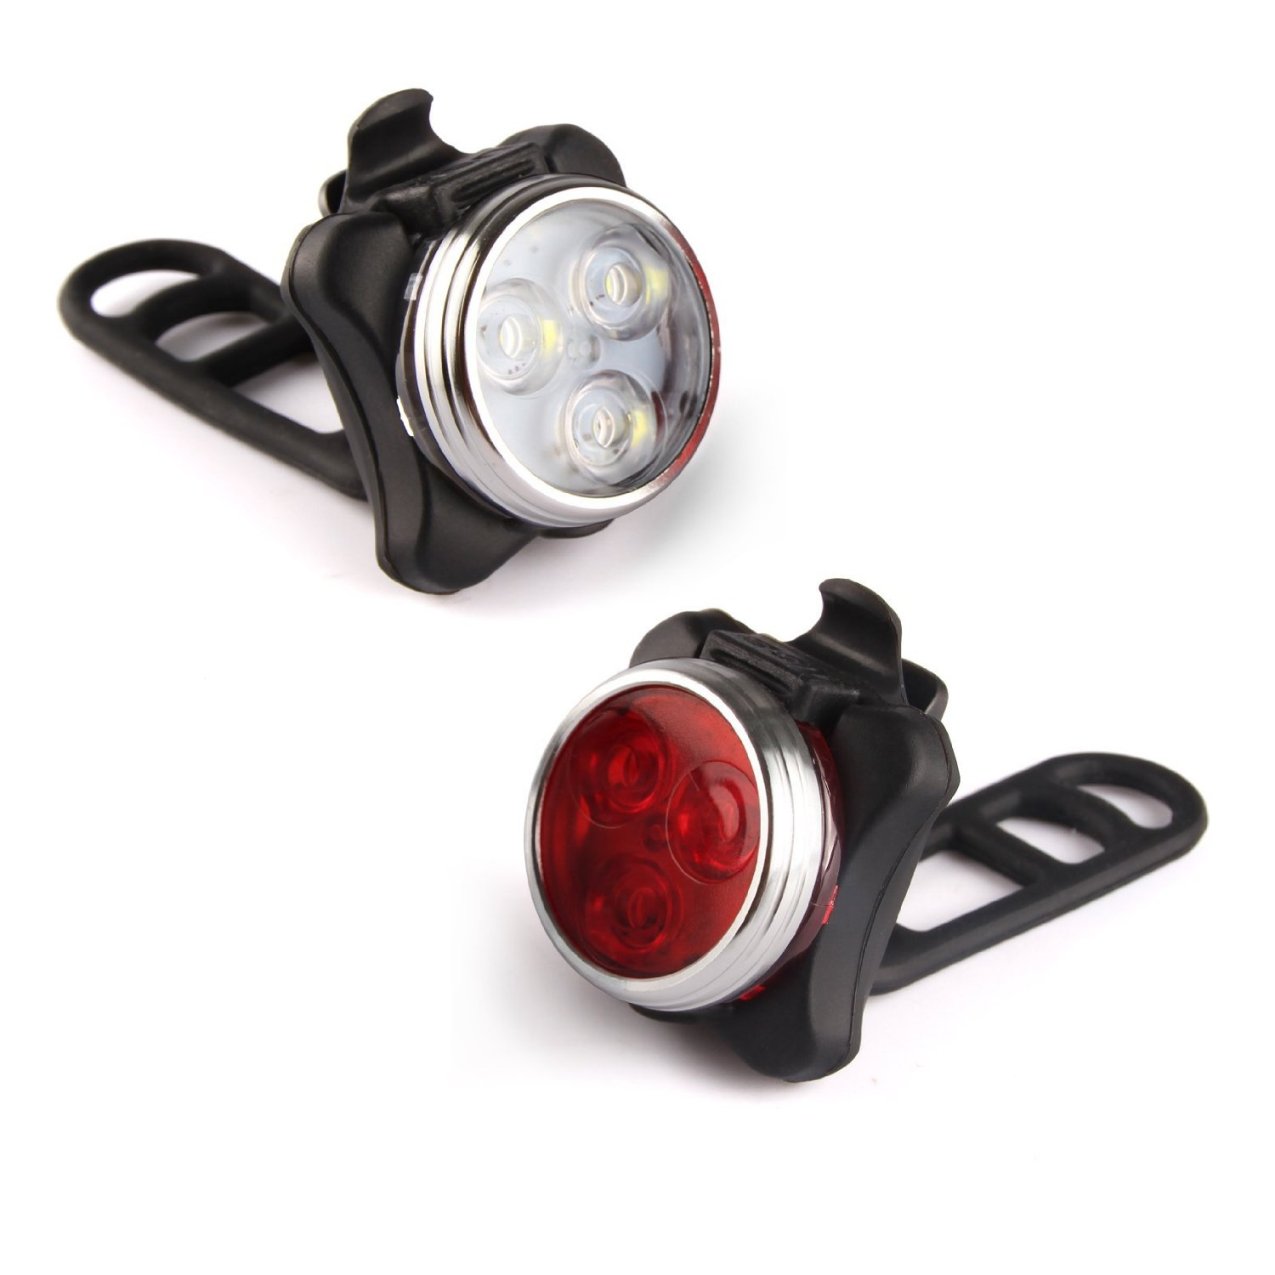 A Ascher : ACHAS-3L* ไฟสำหรับติดจักรยาน LED Bicycle Light- Ascher Super Bright Rechargeable Front an